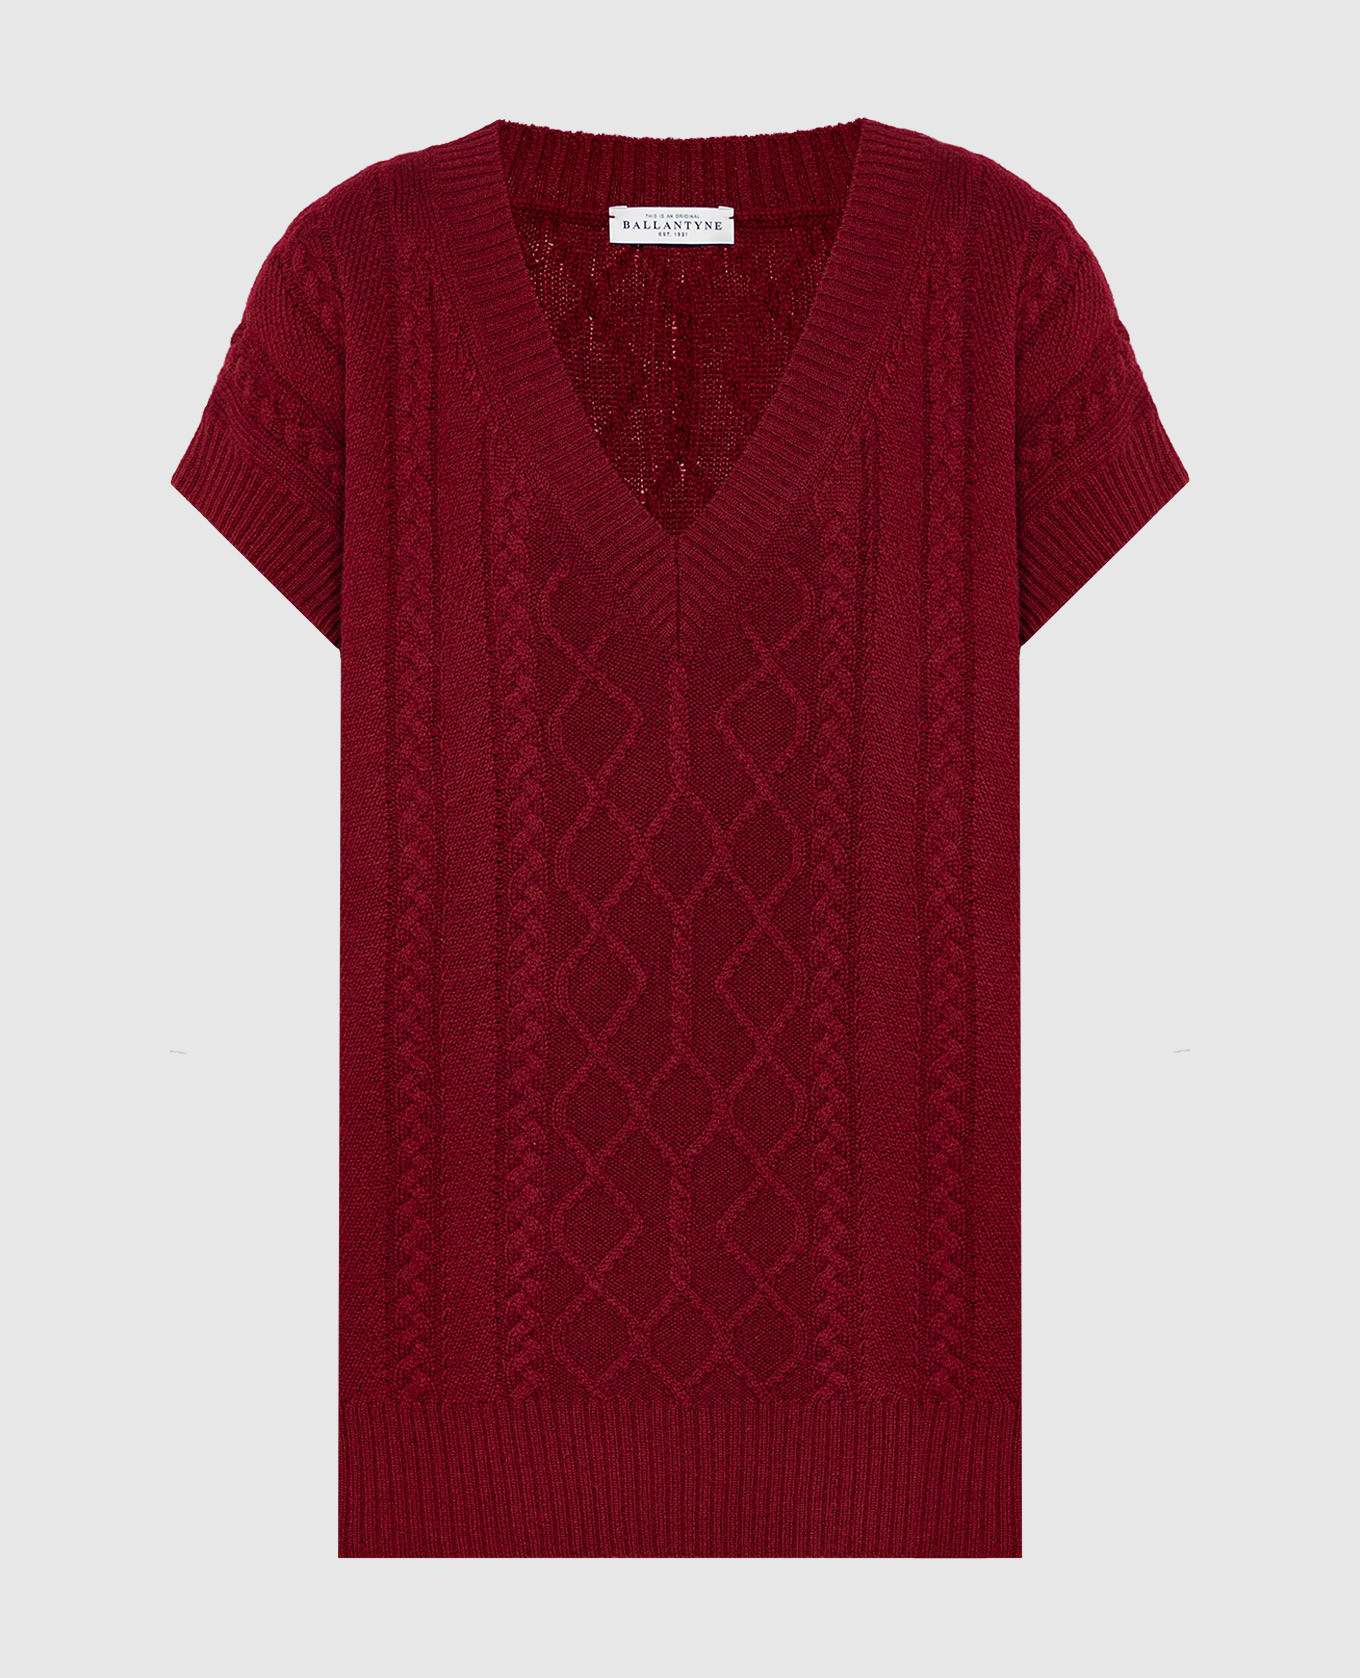 Burgundy vest made of wool in a textured pattern